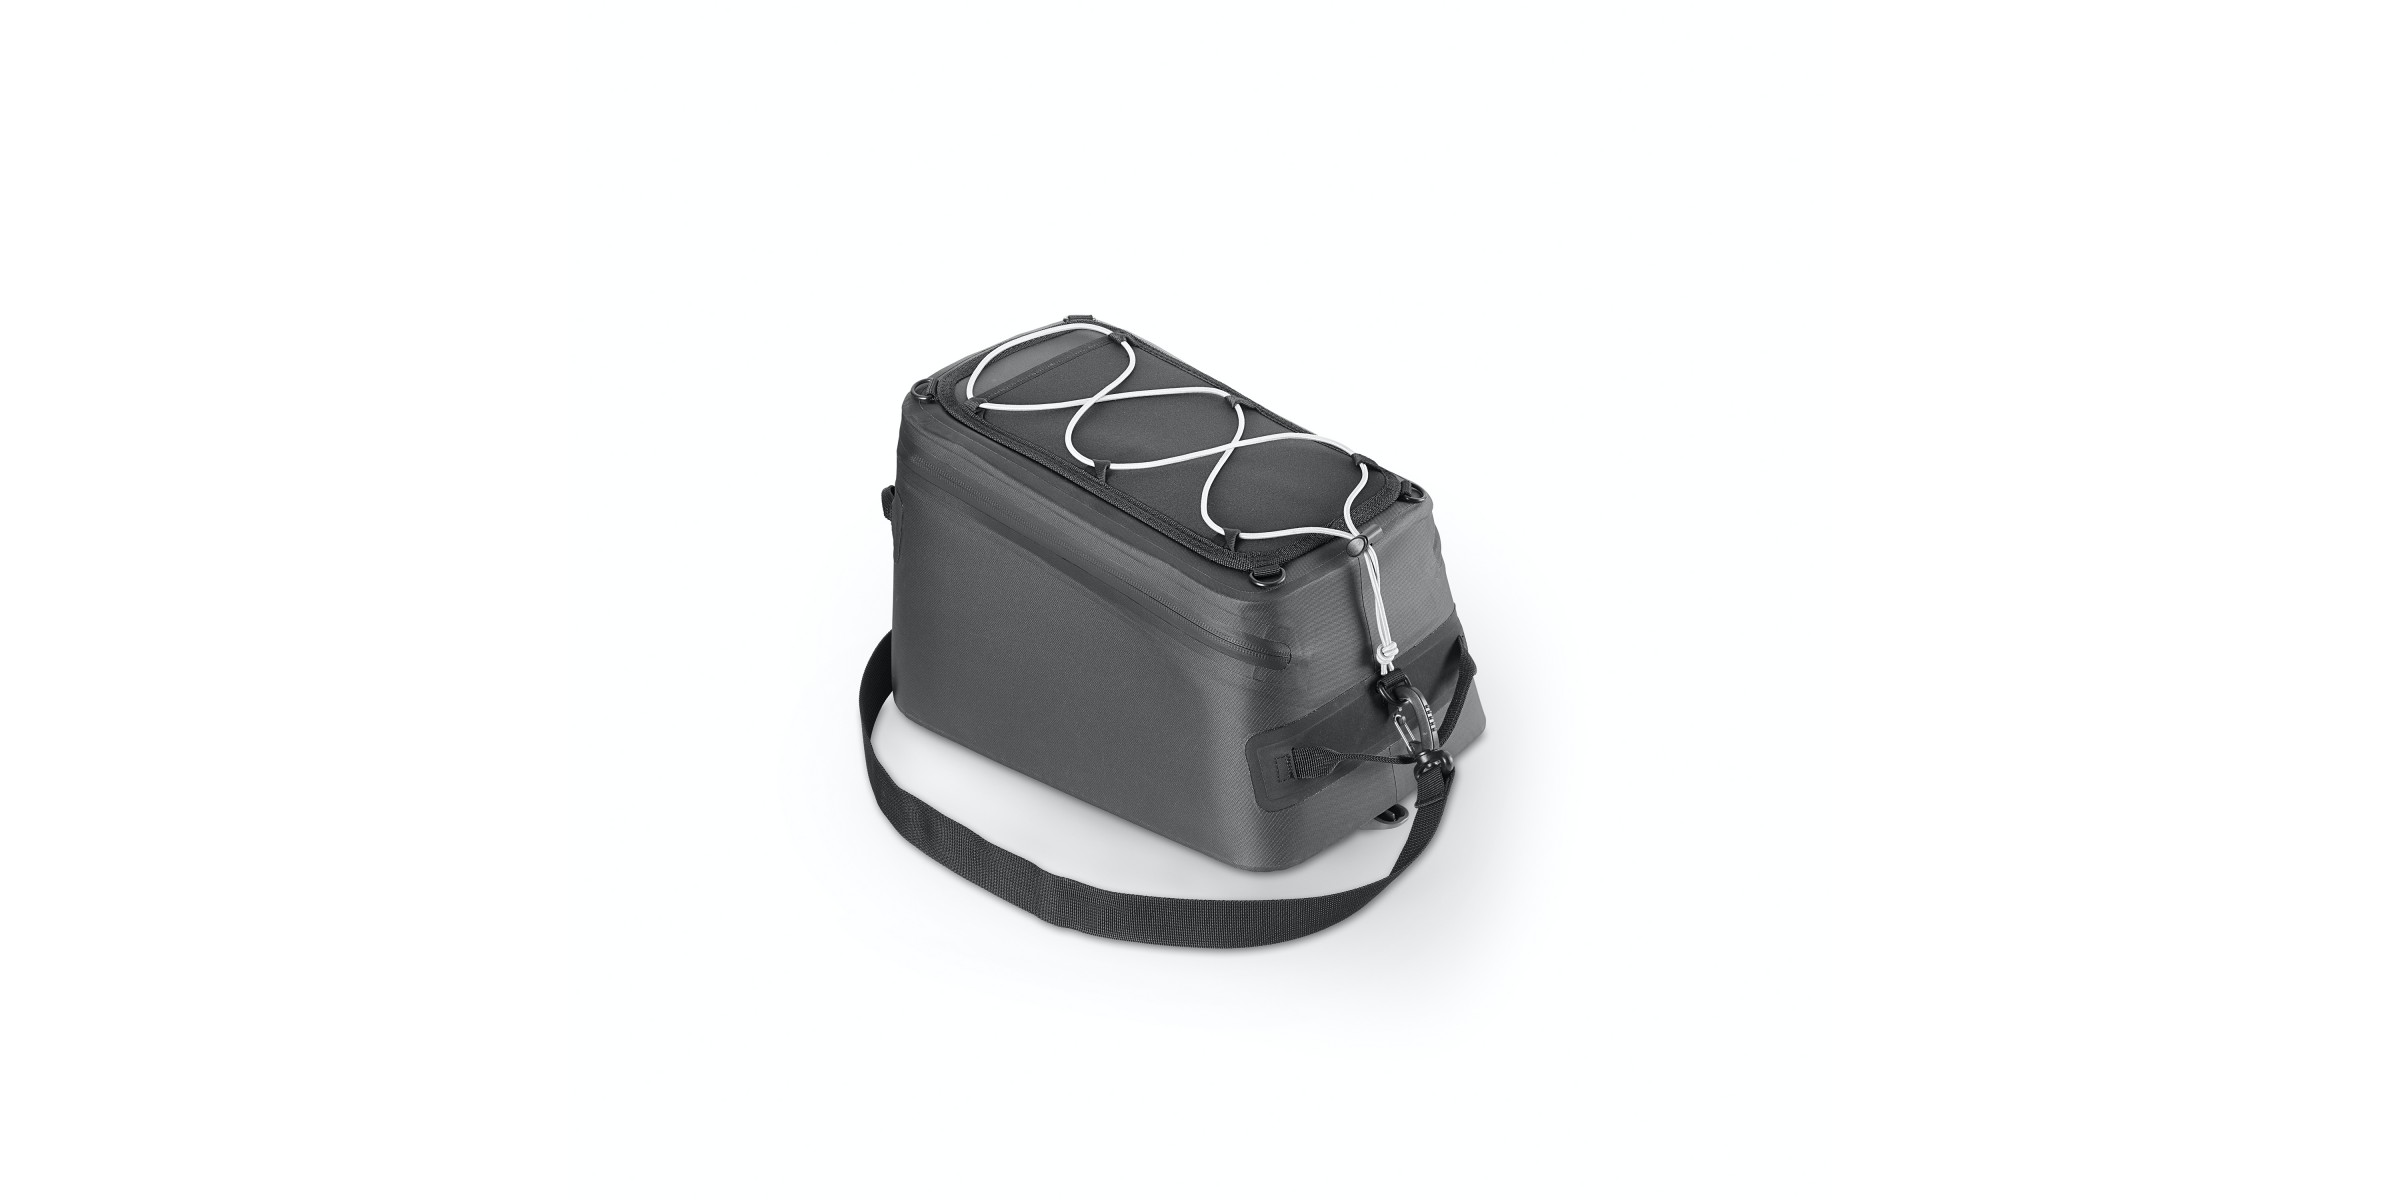 <a href="https://cycles-clement.be/product/stromer-trunkbag-berlin/">STROMER TRUNKBAG BERLIN</a>